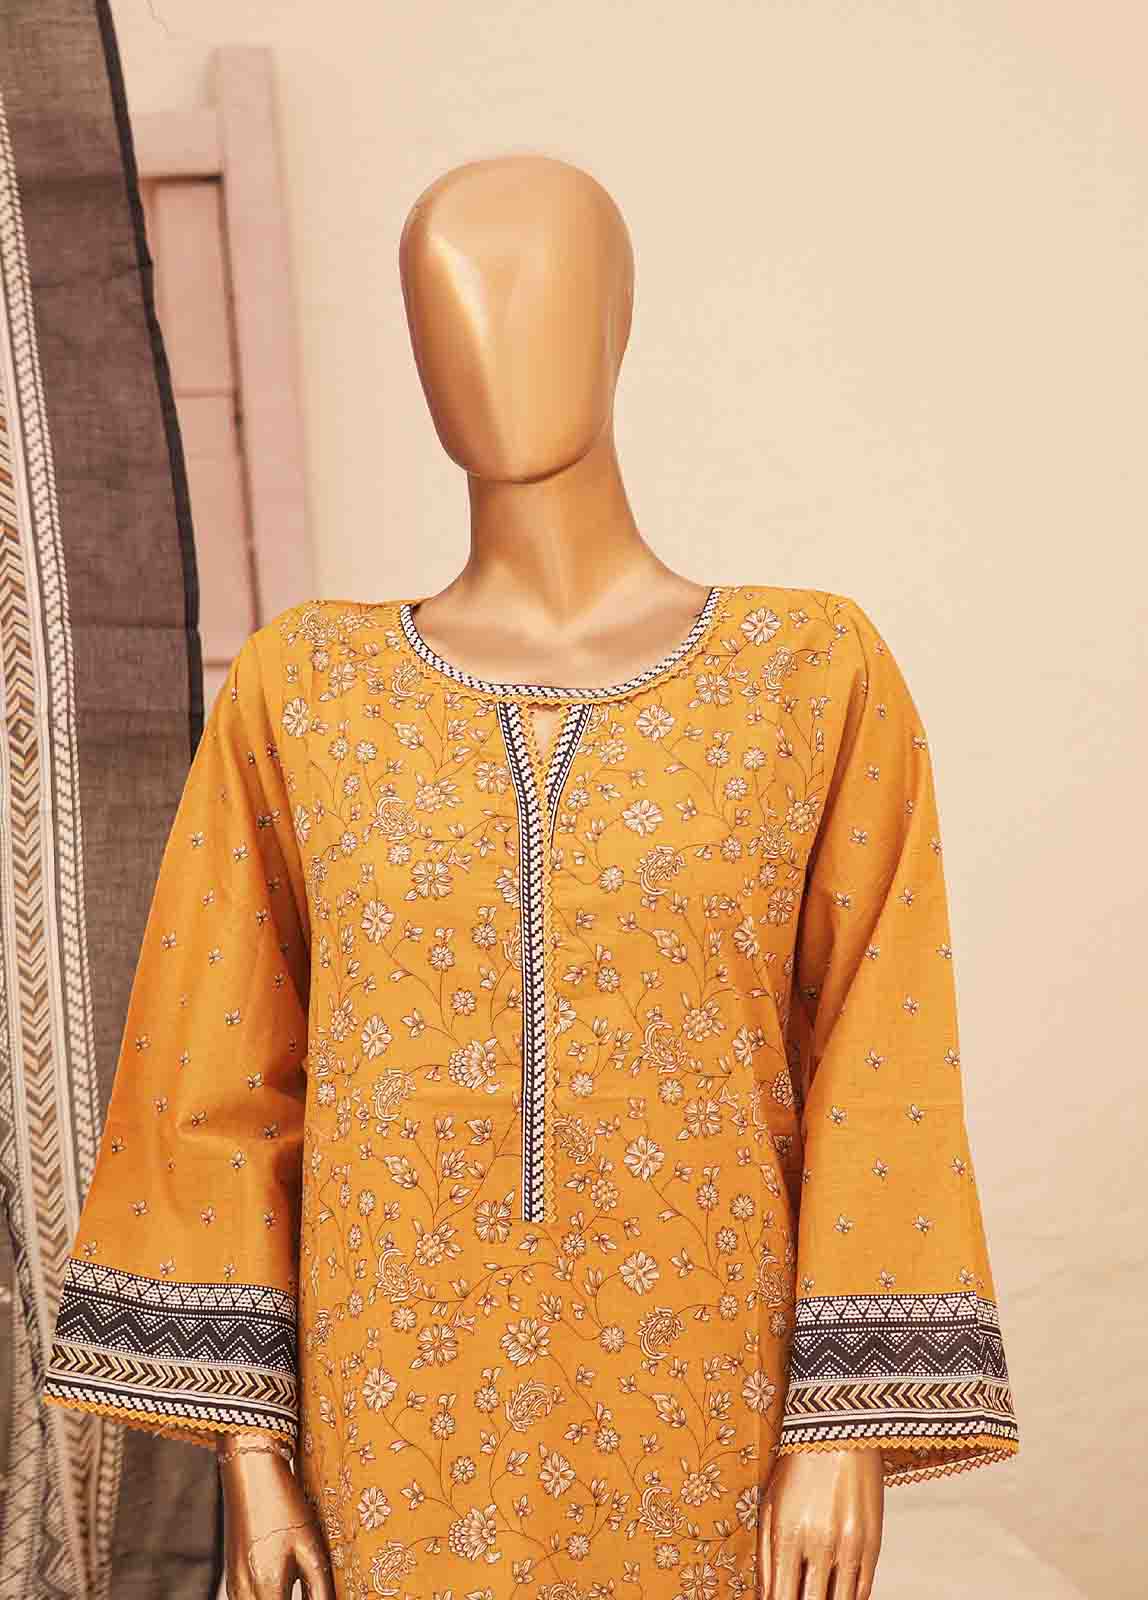 SMPR-0016- 3 Piece Printed Stitched Suit